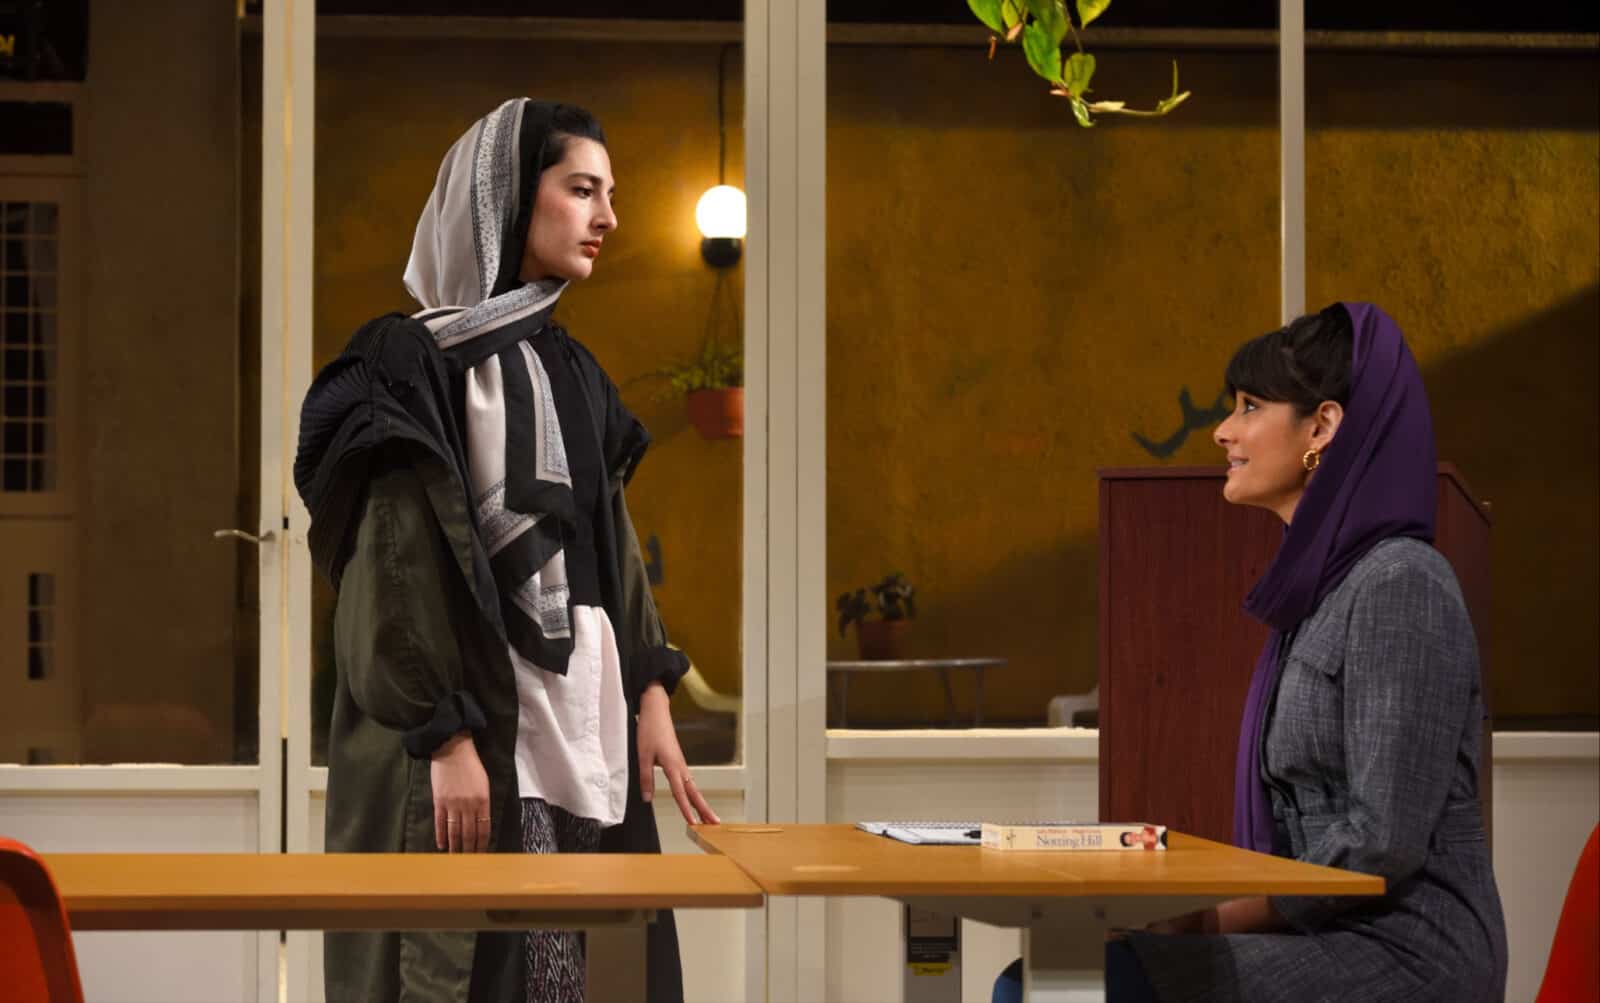 Sanaz Toossi, playwright and actor, speaks as Elham, a student holding eye contact with her teacher, Nazanin Nour as Marjan, in Toossi's nationally awardwinning play 'English' at Barrington stage. Press photo courtesy of BSC